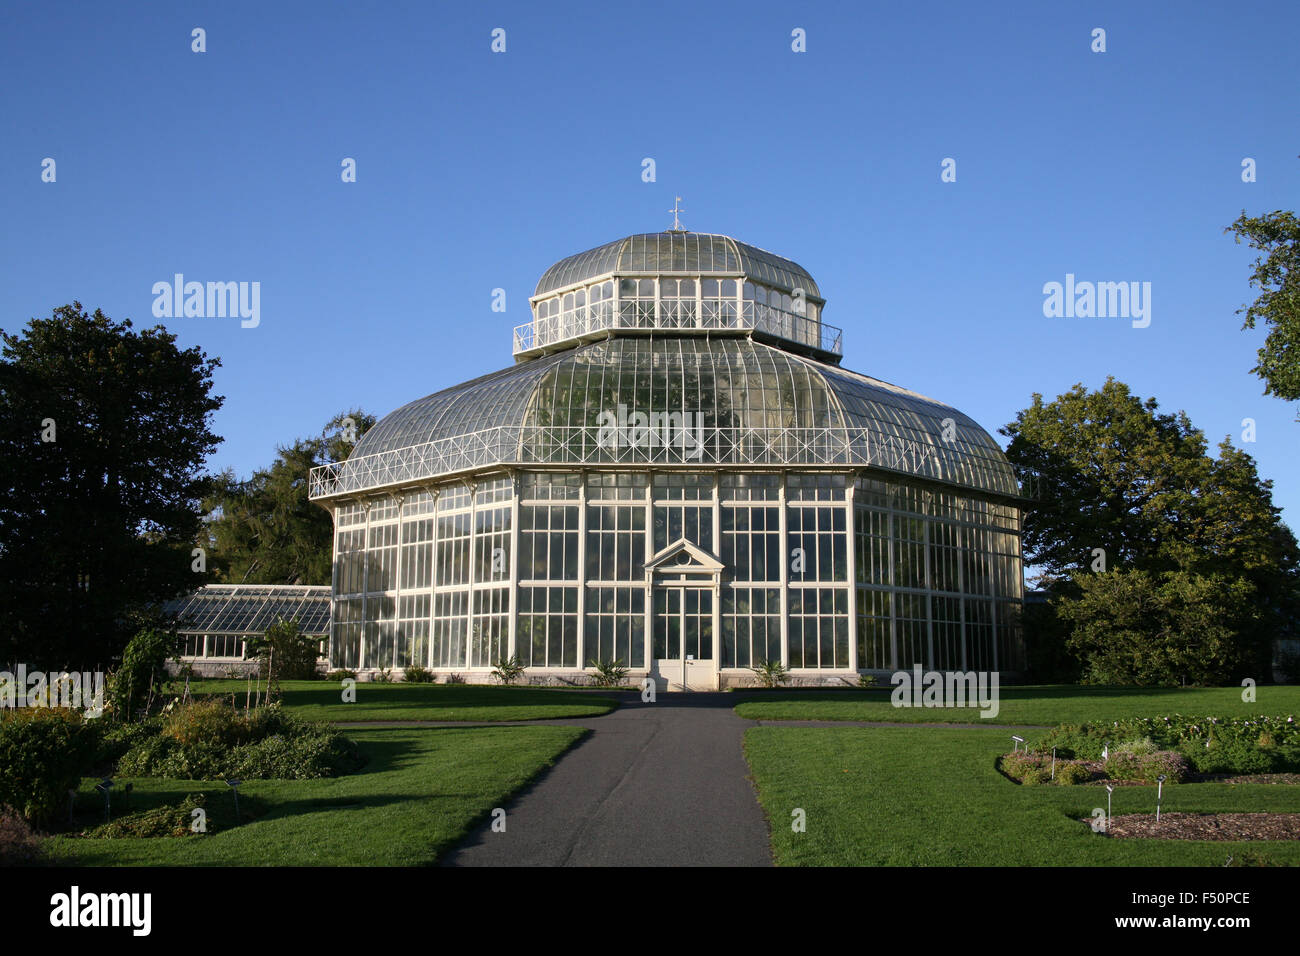 The The Great Palm House at the National Botanic Gardens in Dublin Ireland Stock Photo